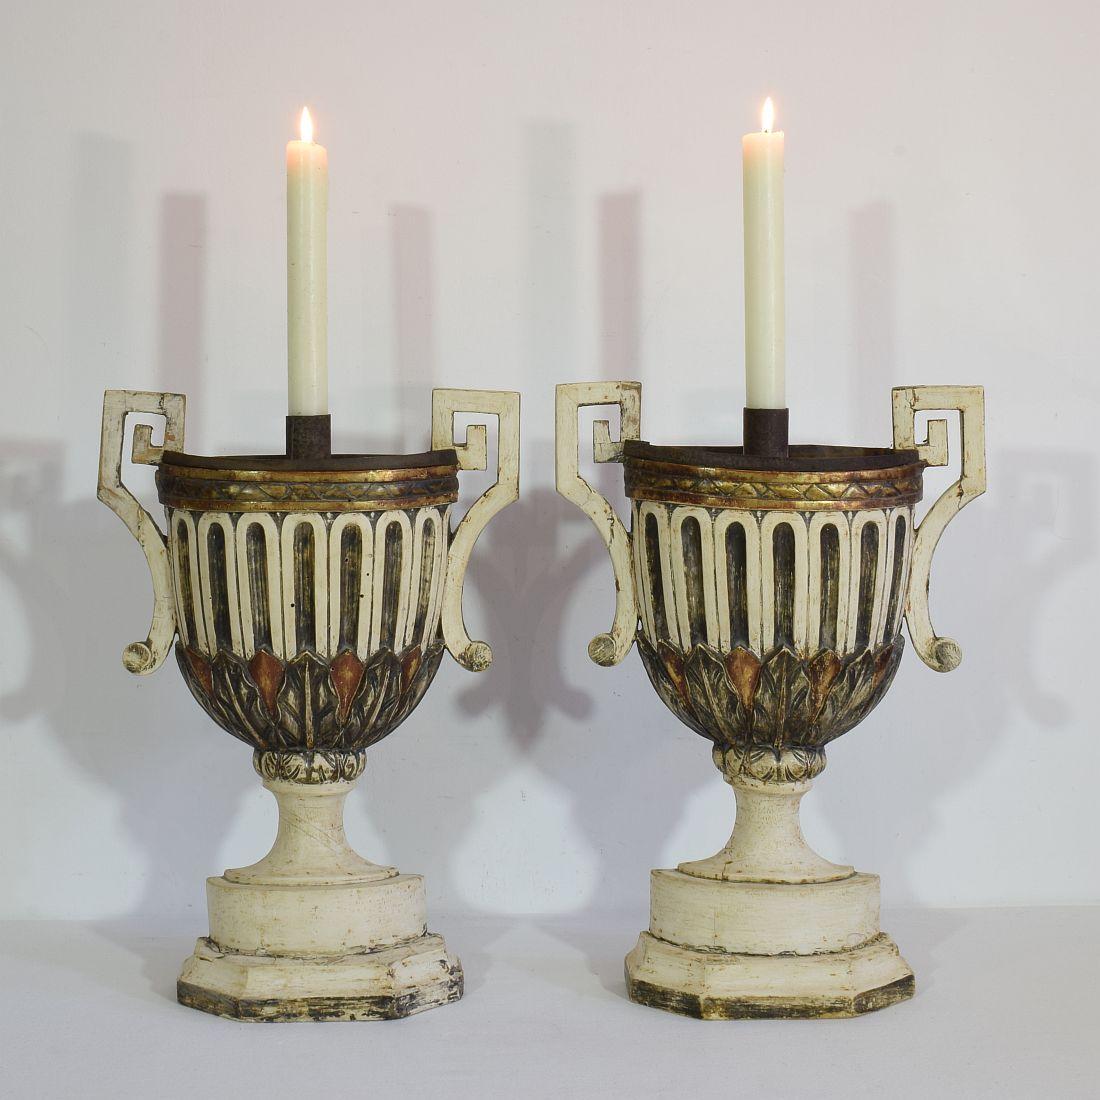 Unique and large pair of neoclassical altar candleholders with traces of their original silver and gold,
Italy, circa 1760-1780. Weathered, small losses and old repairs. Measurement each.
More photo's available on request.